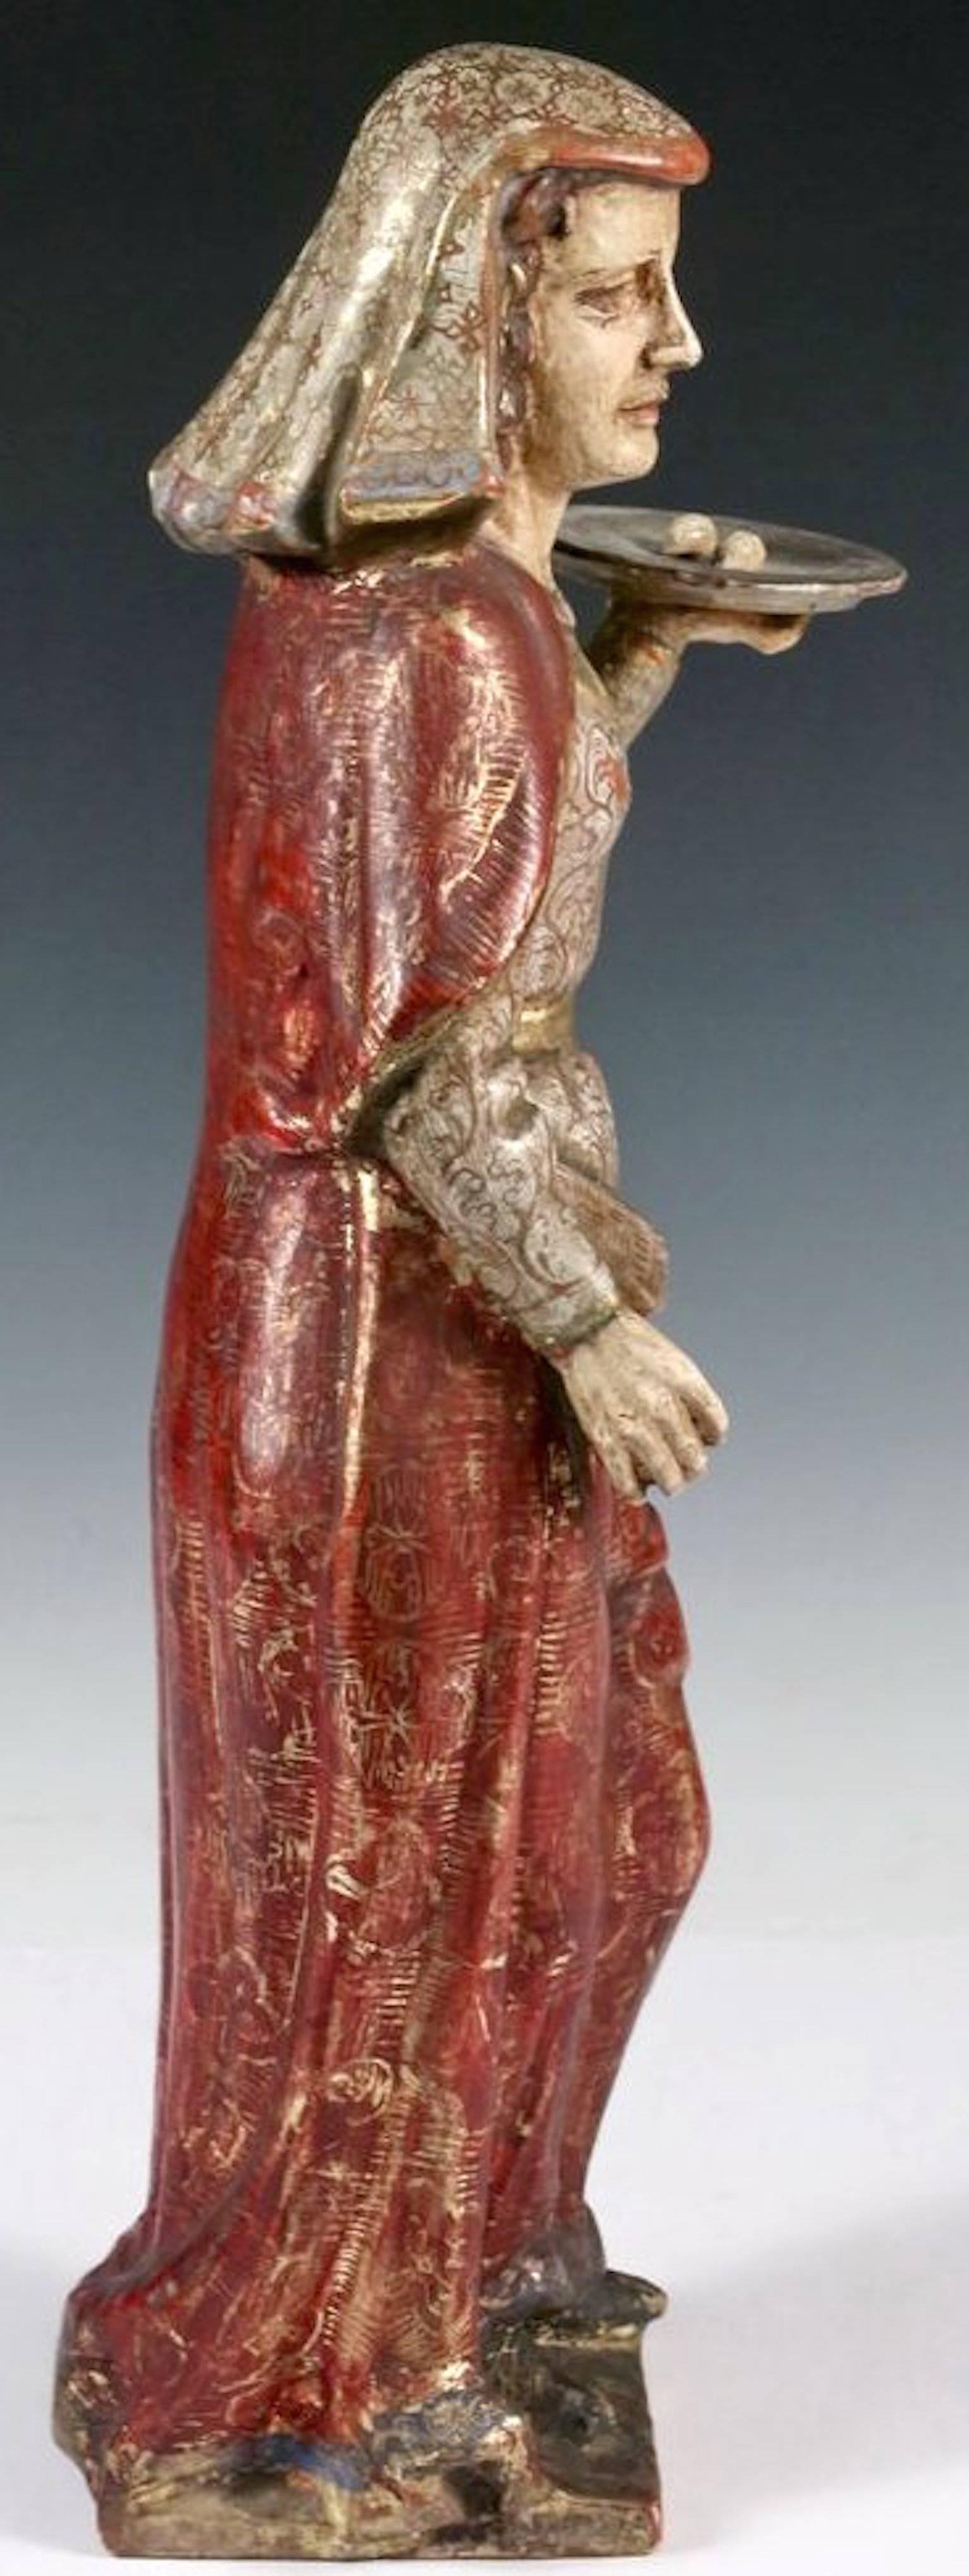 She is depicted holding a tray aloft with her eyes, which she gouged out in order to keep from being married off to a Pagan. Polychromed gesso with gilding.  Some small bits of polychrome missing off the back, as seen in the images.  